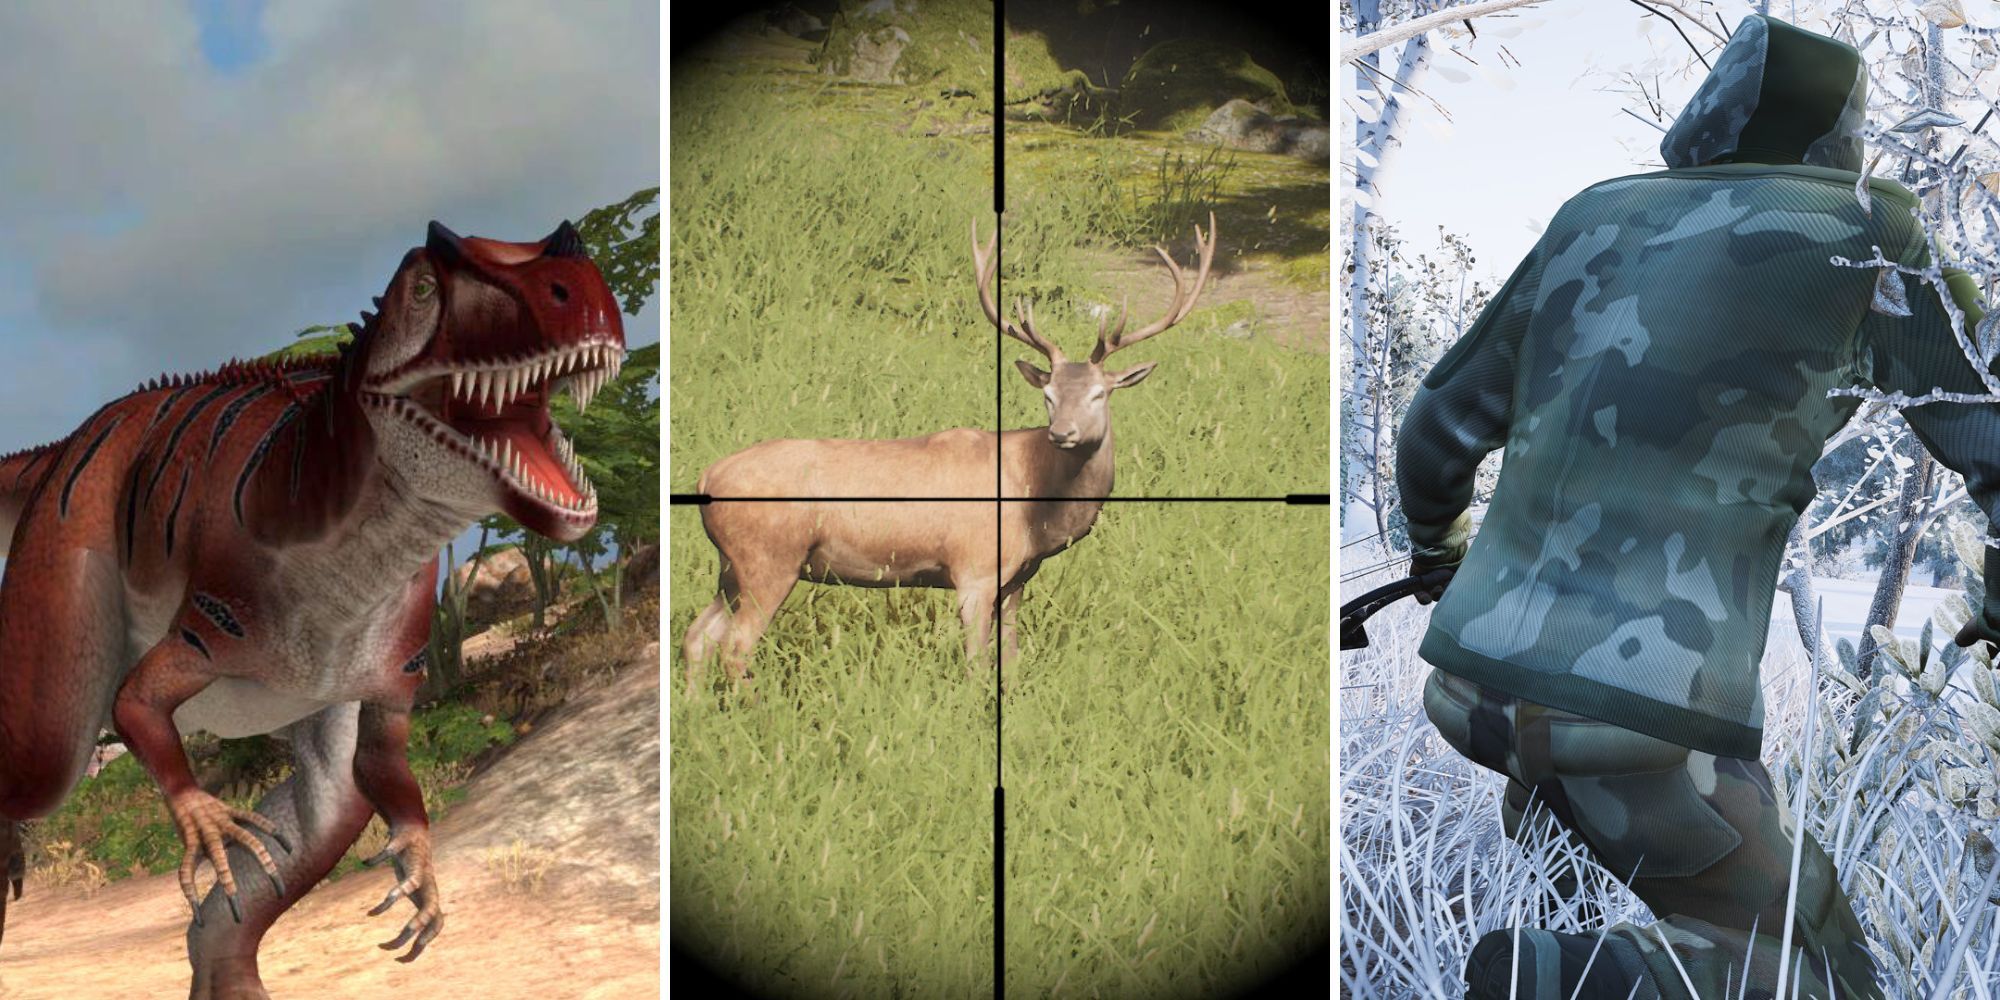 A grid showing the open-world hunting games Carnivores: Dinosaur Hunt, Project Hunt, and Hunting Simulator